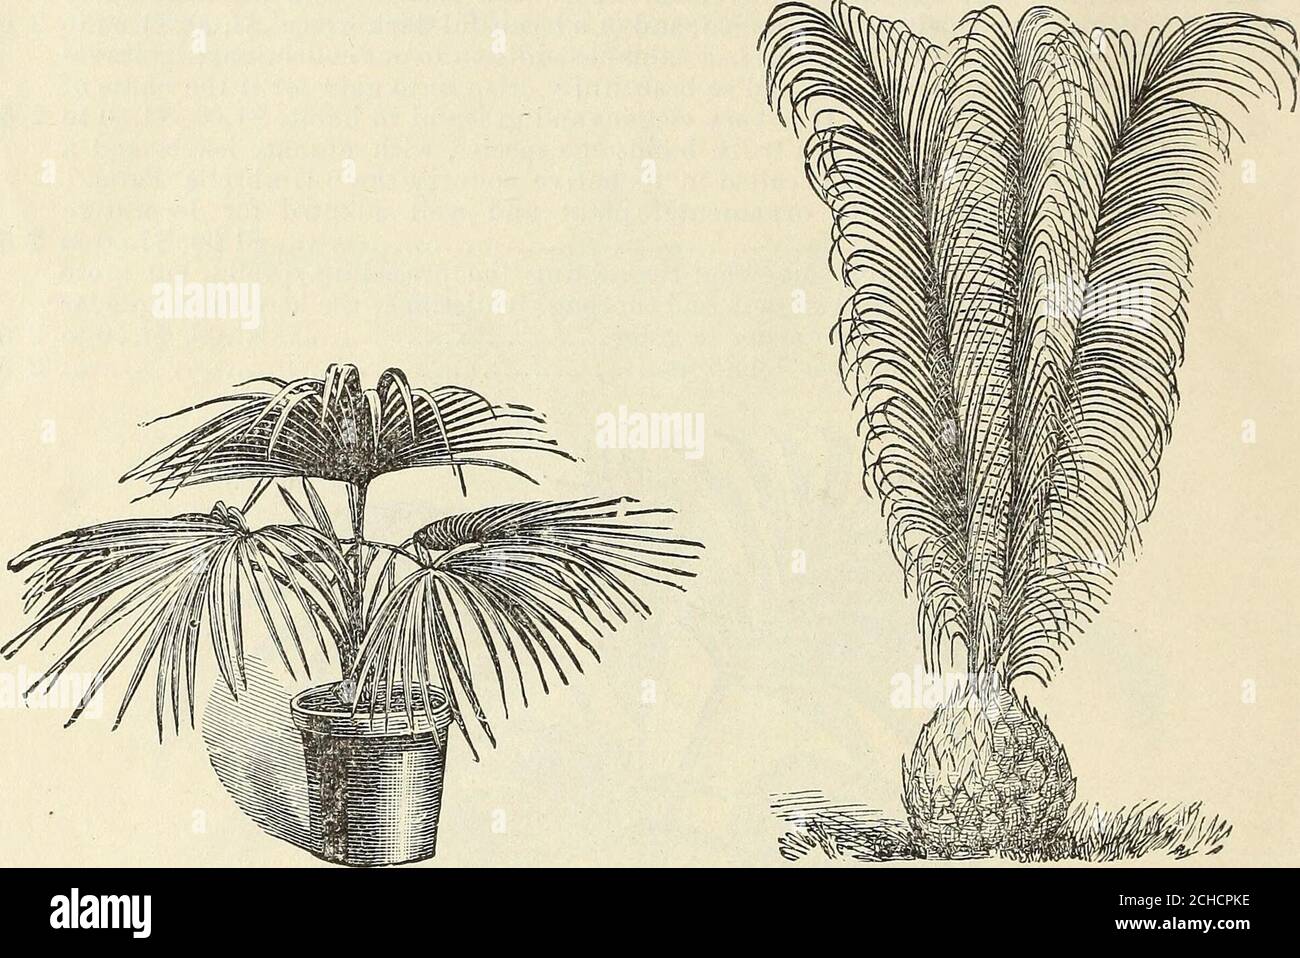 . John Saul's catalogue of plants for the spring of 1884 . ful Palm of low growth $1 50 to ♦Phoenix Dactylifera, (Date Palm.) Leaves long pinnate, dark green, a handsome plant . $1 00 to *Dumosa. Dwarf habit Eeclinata. Leaves pinnate, exceedingly graceful, a fine greenhouse Palm, orfor the flower garden during summer. Fine for decoration, being very graceful 50 cts. to Eupicola. This is one of the most exquisitely graceful amongst Palms, and inelegance takes a similar place to that of Cocos Weddelliana. It is of acaules-cent habit, with wide spreading arching pinnate leaves, a most valuable ac Stock Photo